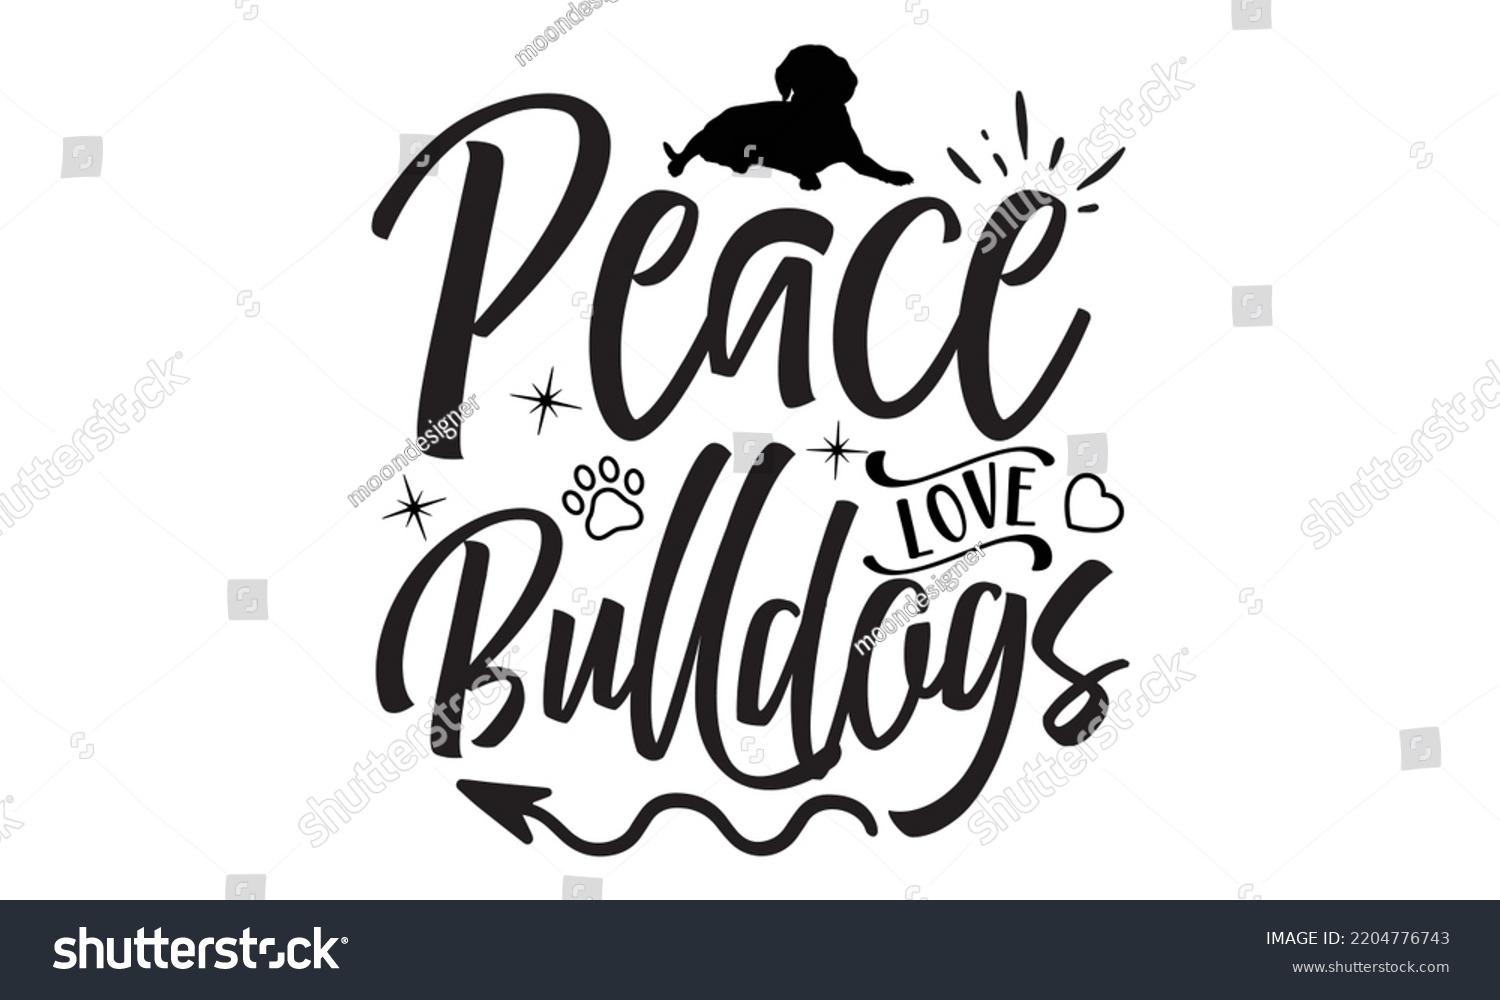 SVG of Peace love bulldogs - Bullodog T-shirt and SVG Design,  Dog lover t shirt design gift for women, typography design, can you download this Design, svg Files for Cutting and Silhouette EPS, 10 svg